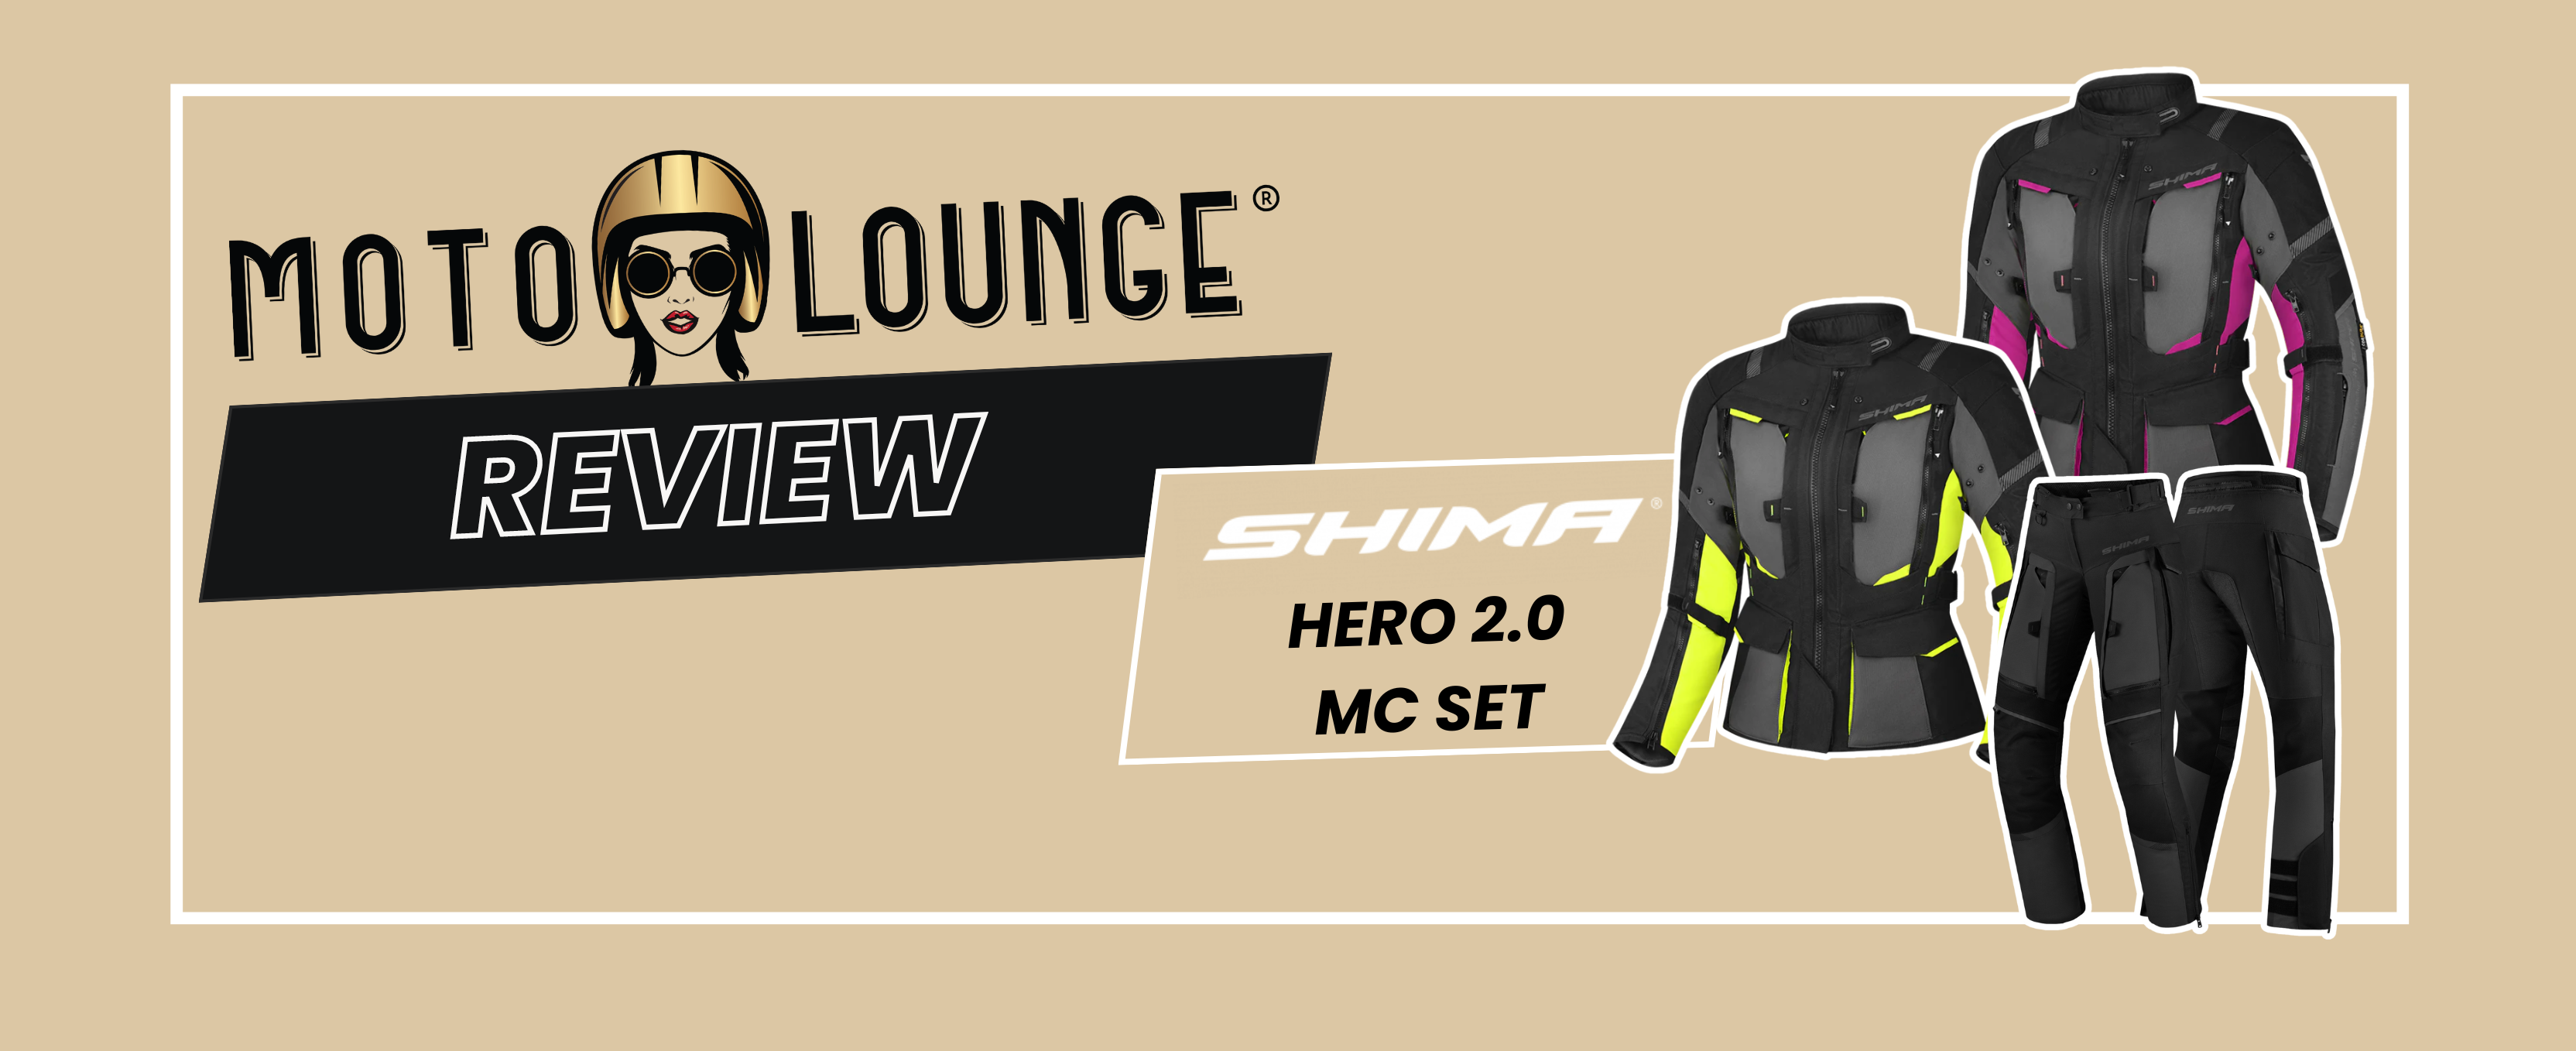 Review: The Hero 2.0 motorcycle Set from Shima